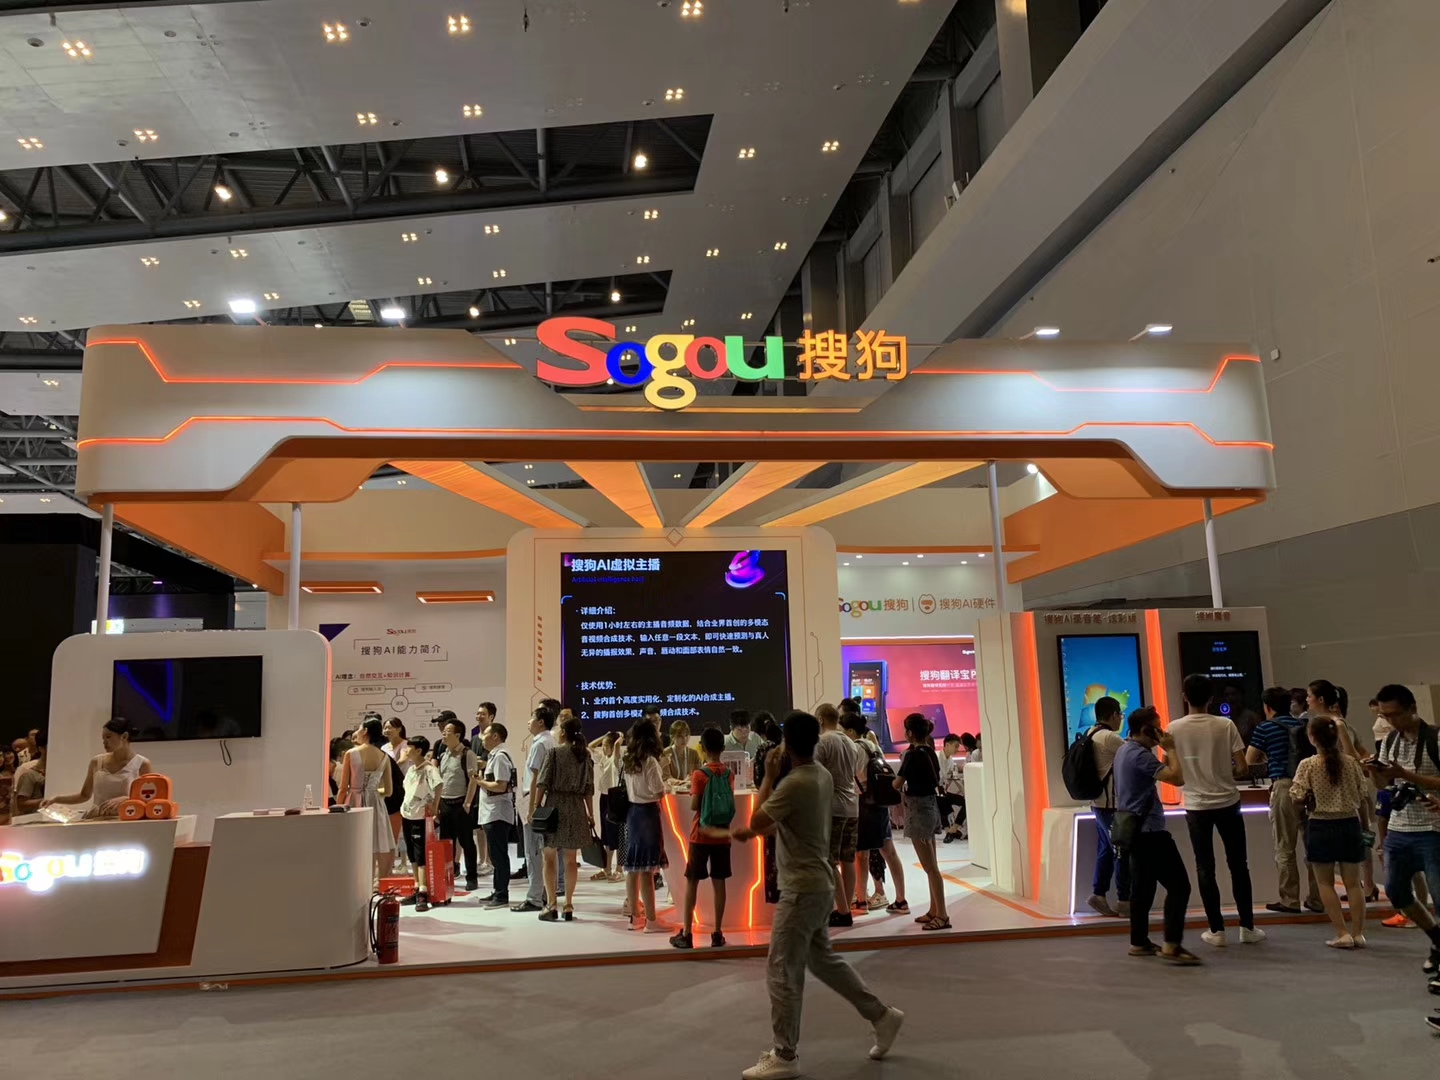 Tencent’s USD 2.1 billion buyout of online search service Sogou could supercharge WeChat, analysts say